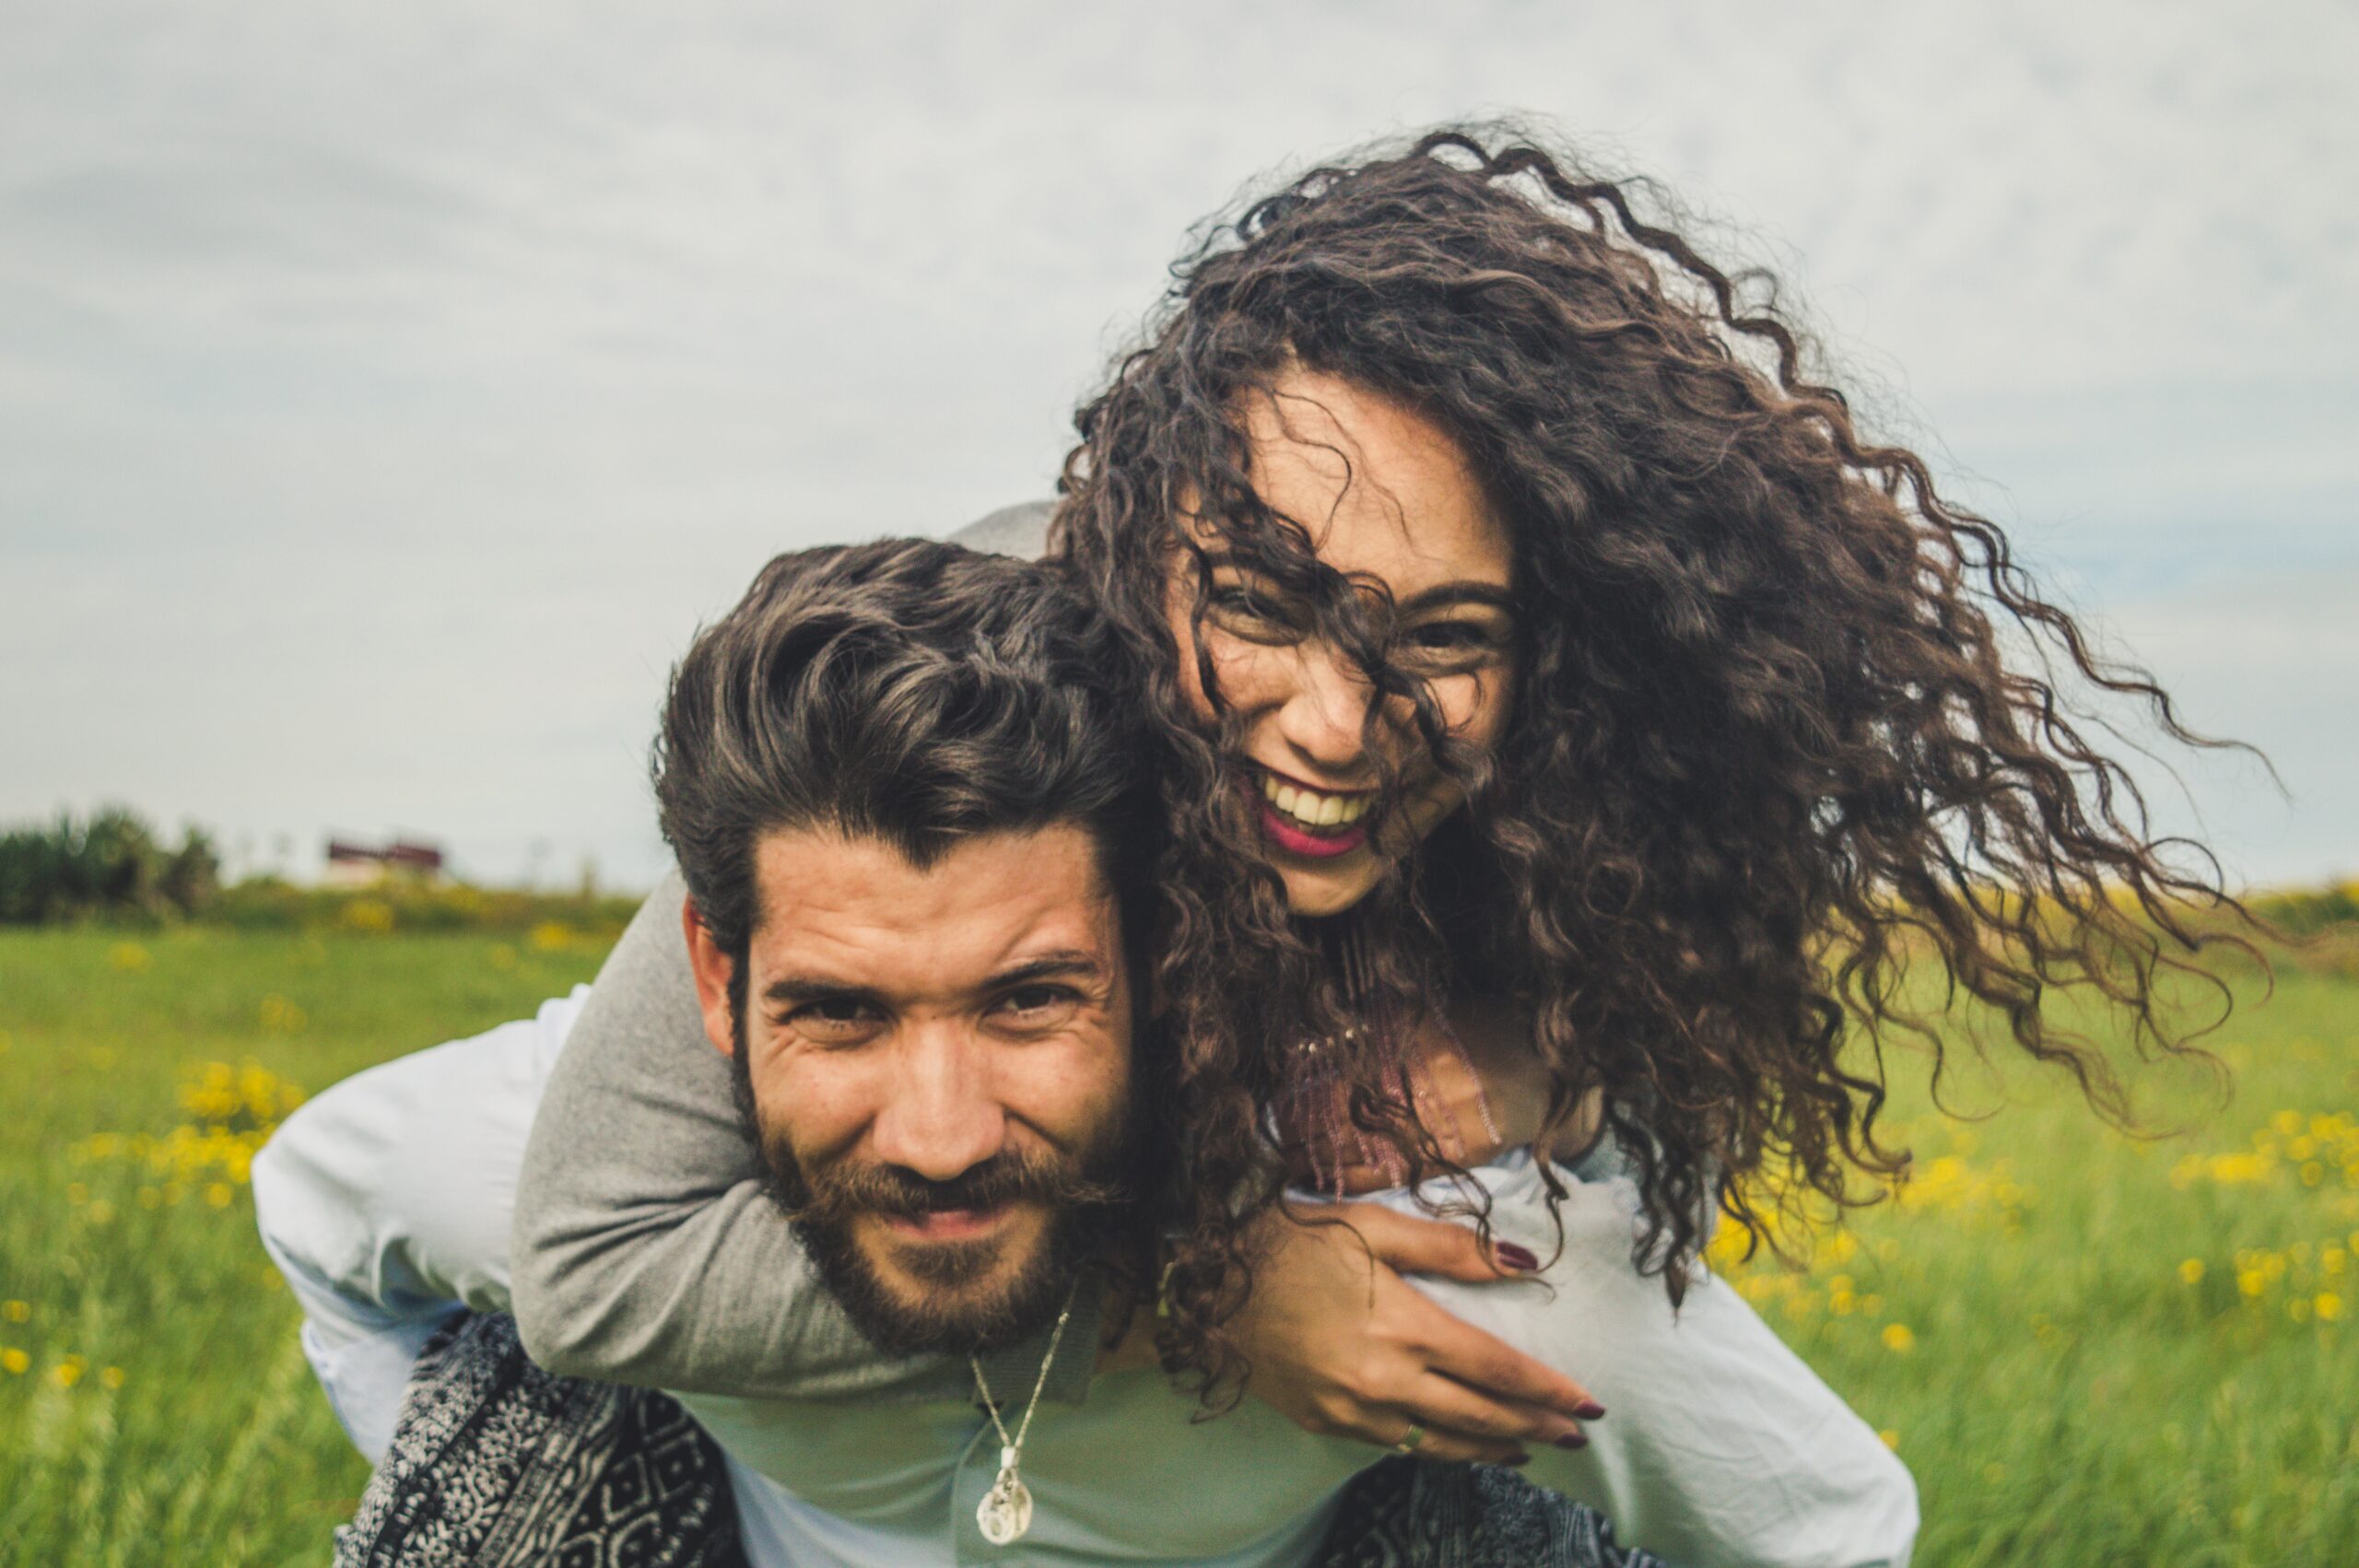 7 Important Qualities Women Want In A Man